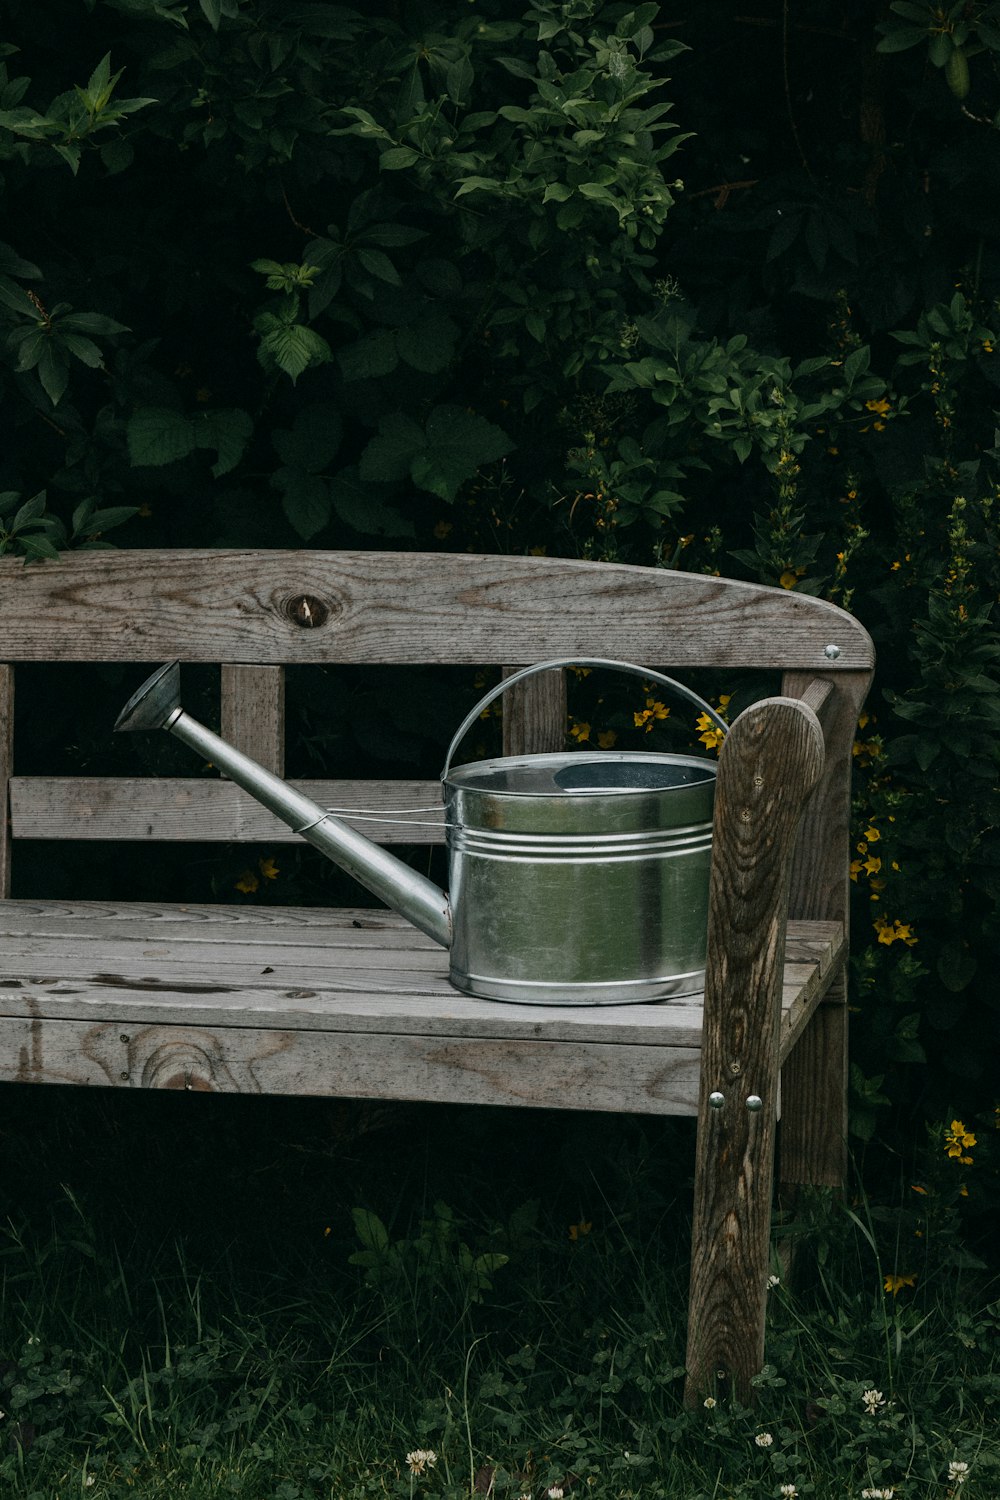 a wooden bench with a watering can on it